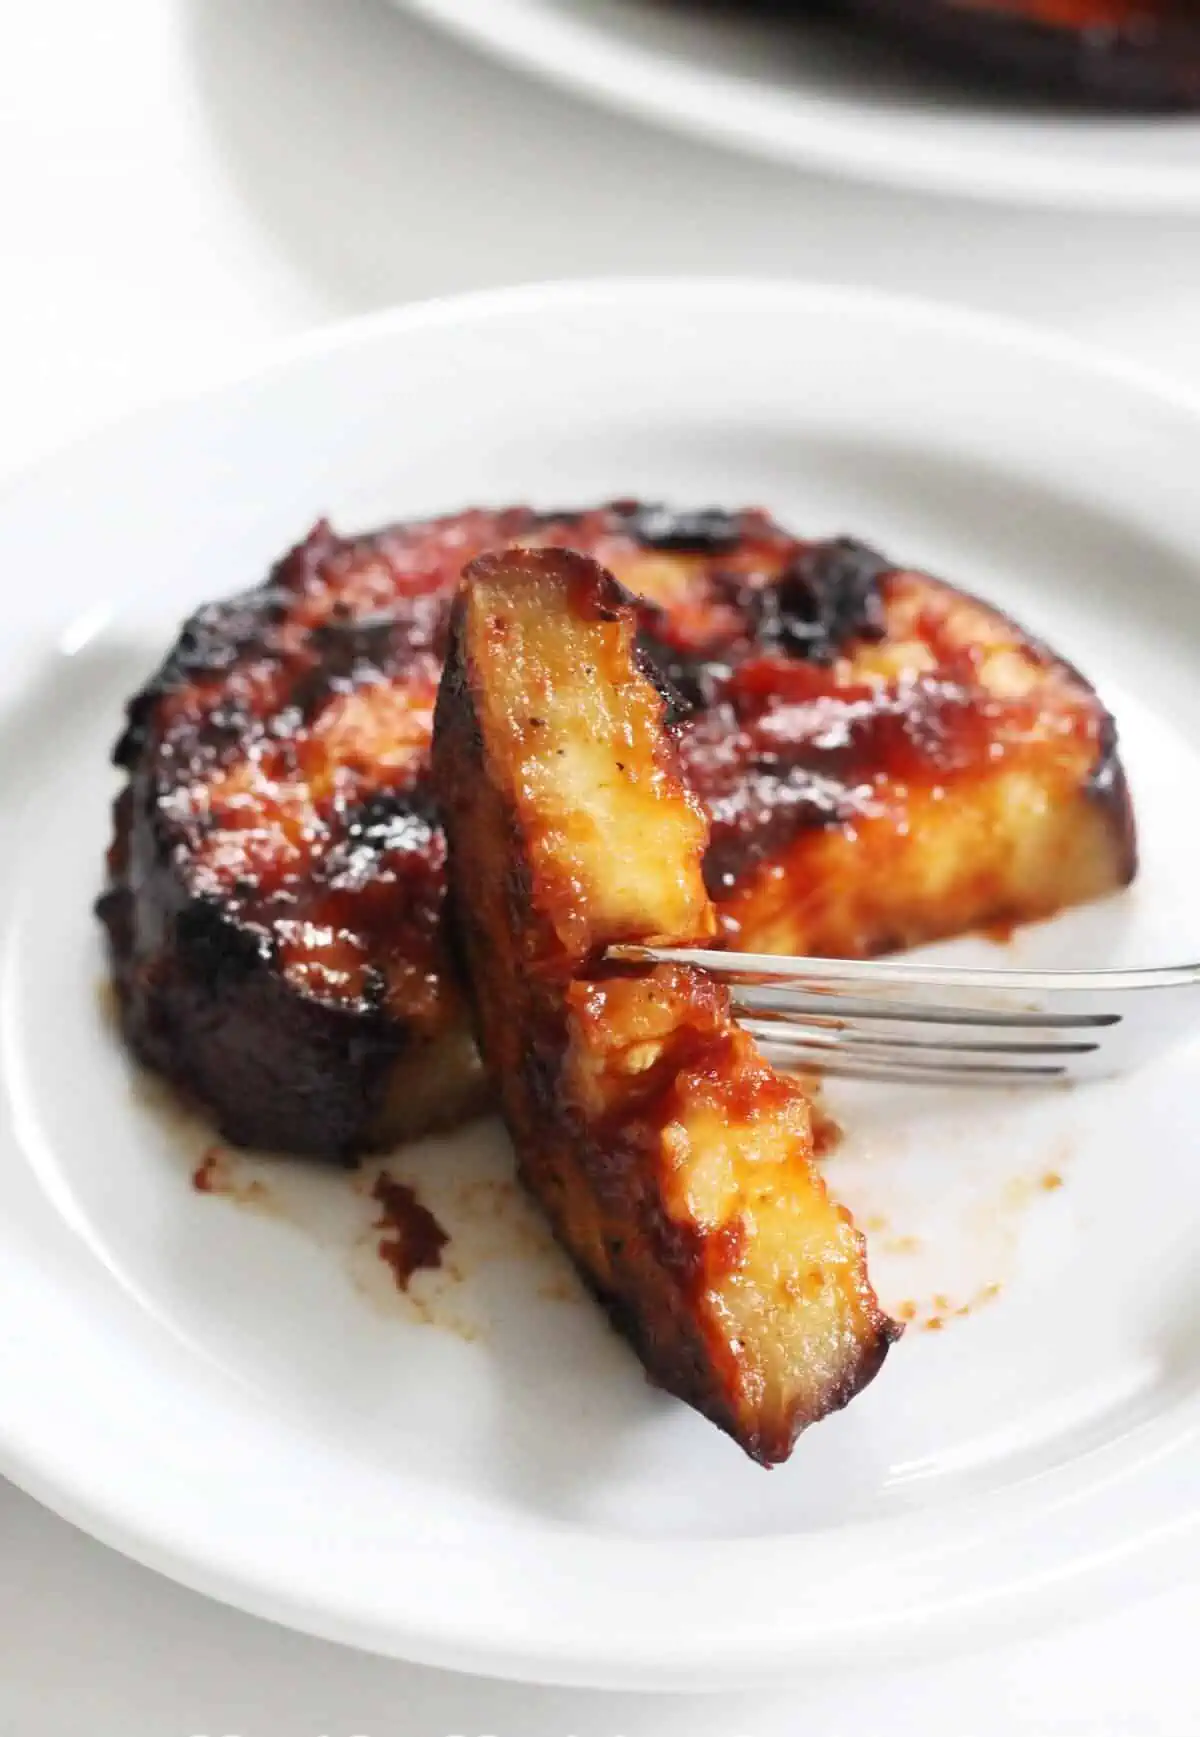 Grilled eggplant steak on a plate with a fork holding a bite that has been sliced off.